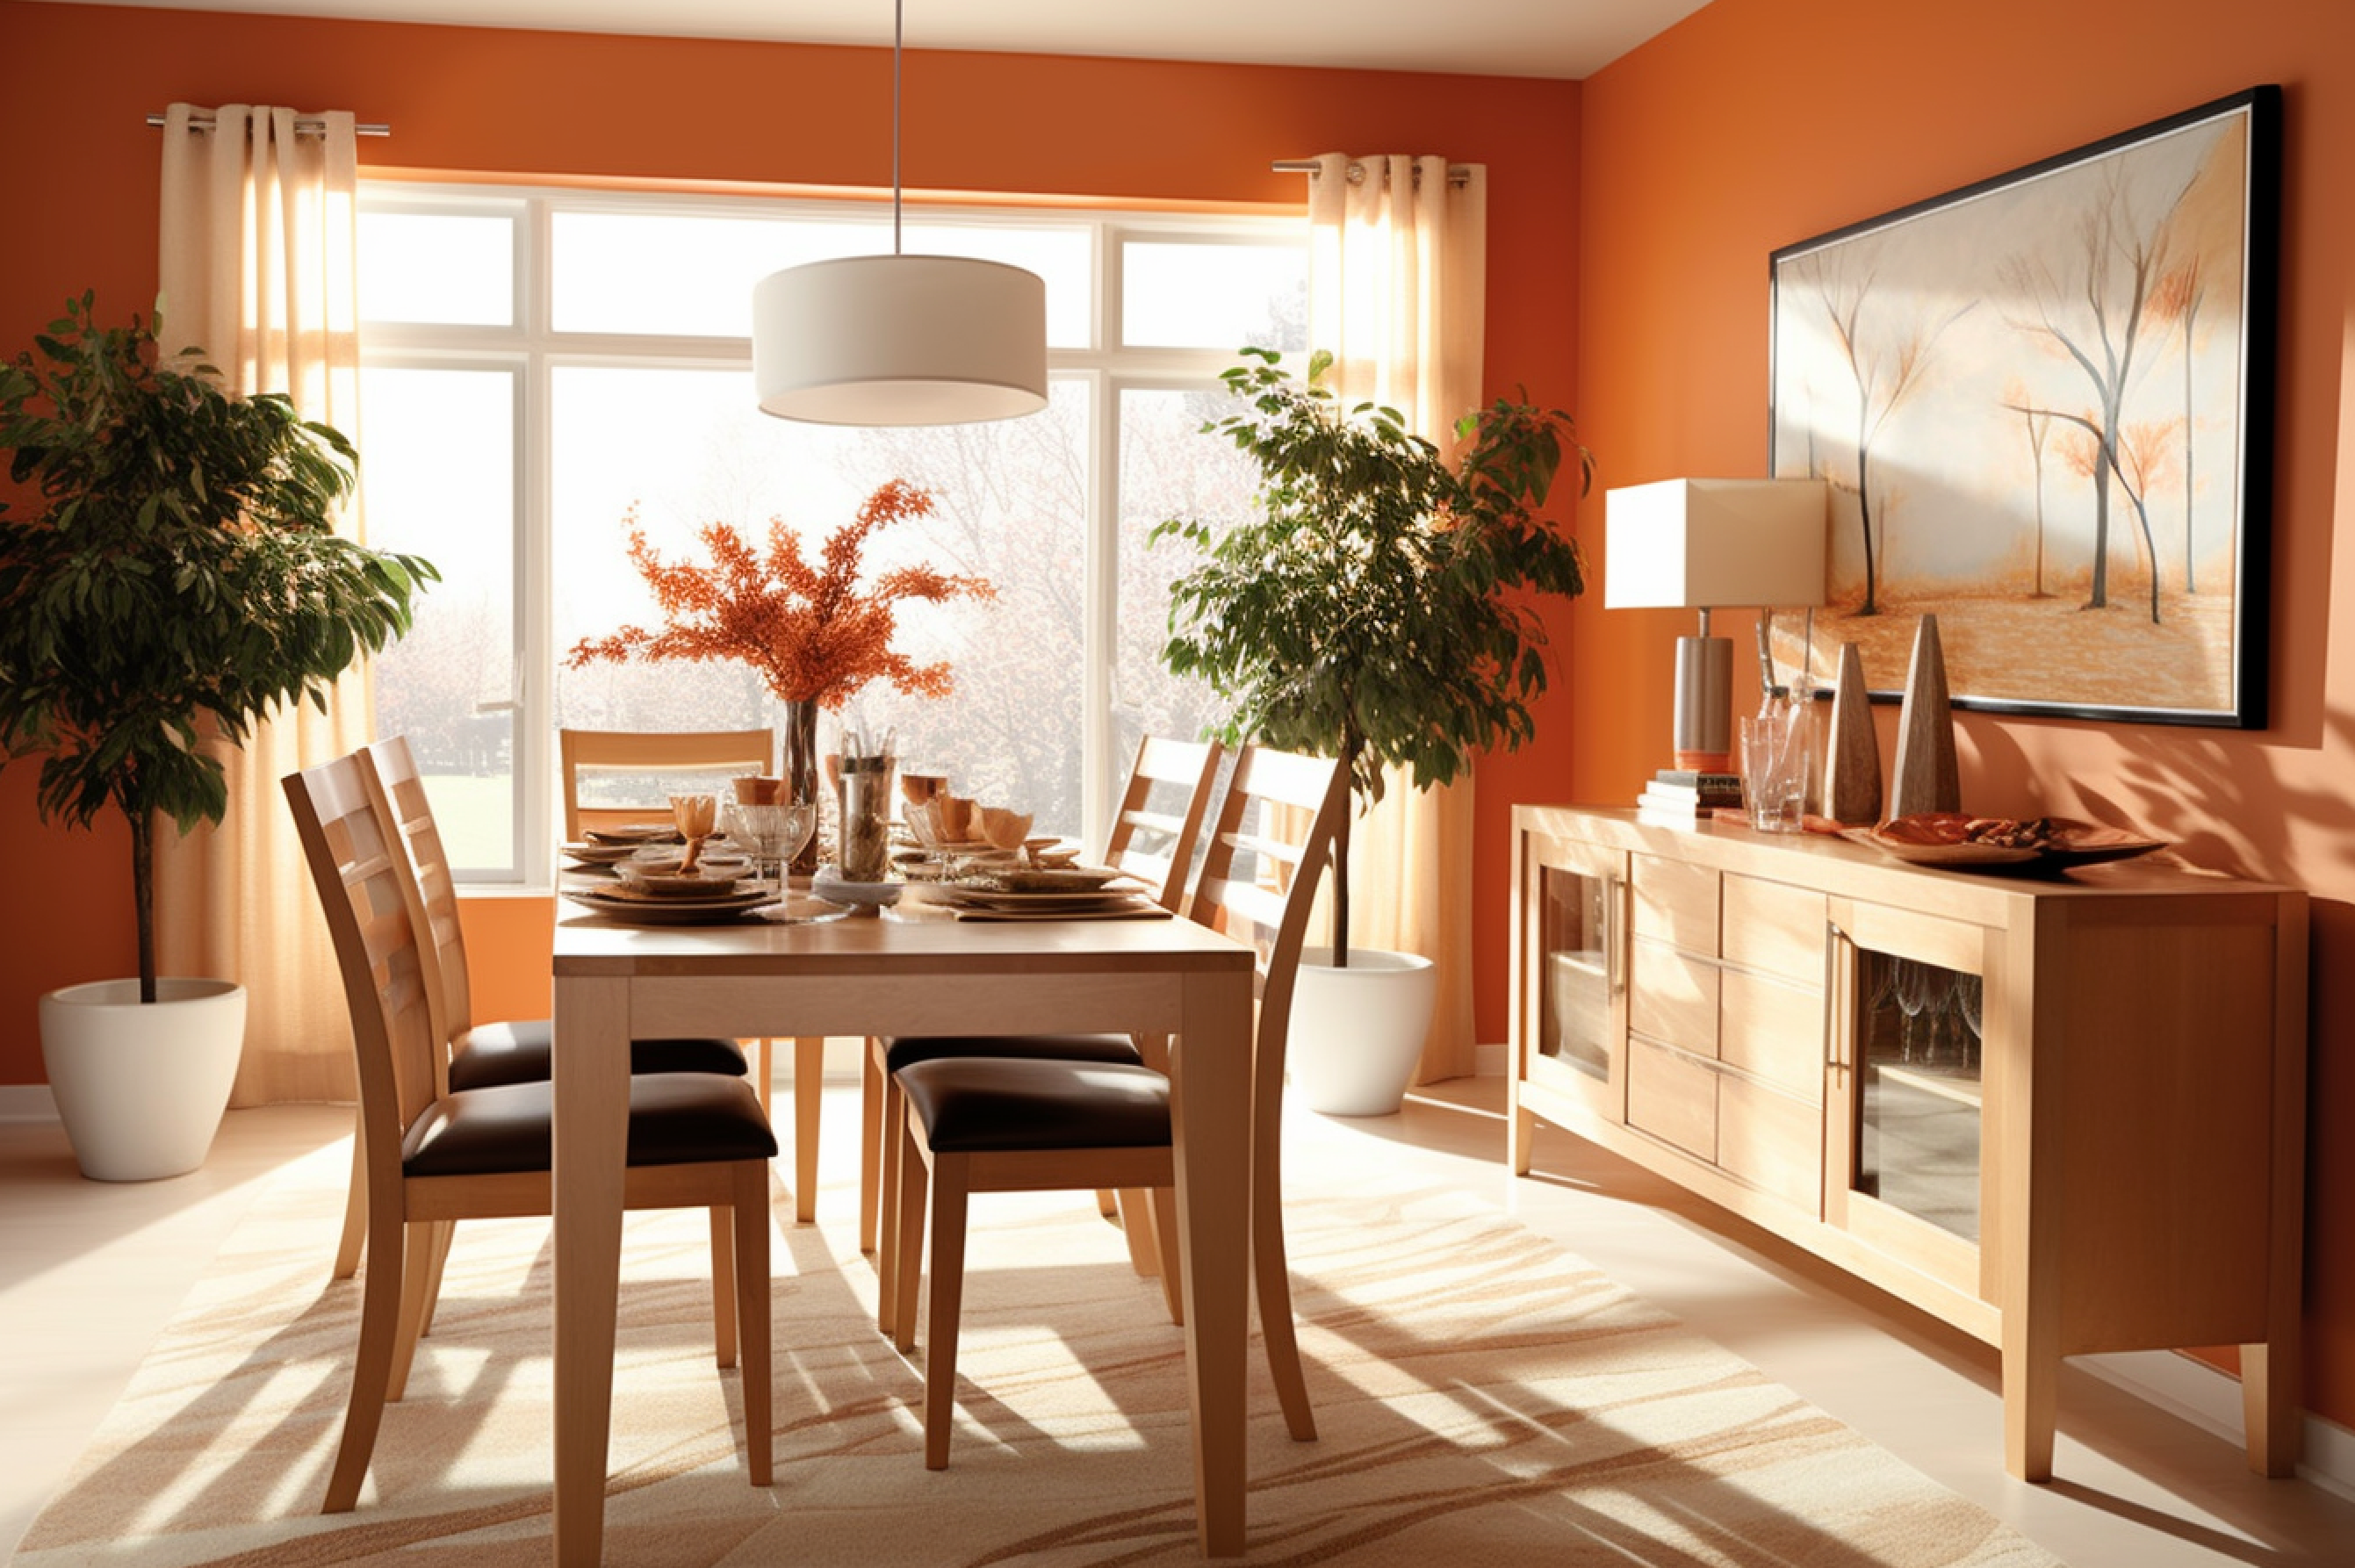 Image featuring a dining room with caramel brown wooden furniture and sunset orange table decorations.